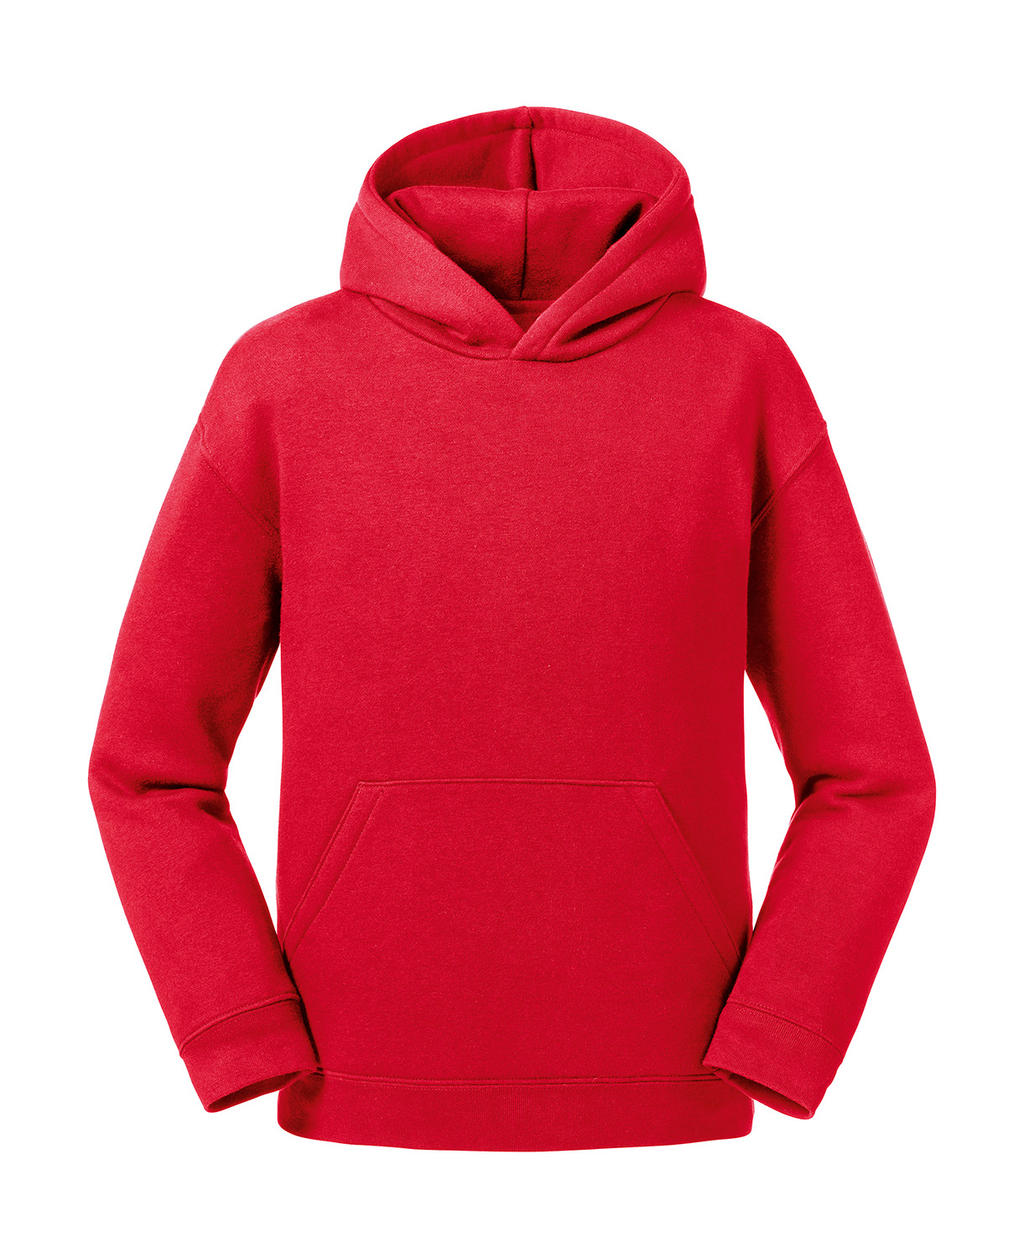  Kids Authentic Hooded Sweat in Farbe Classic Red